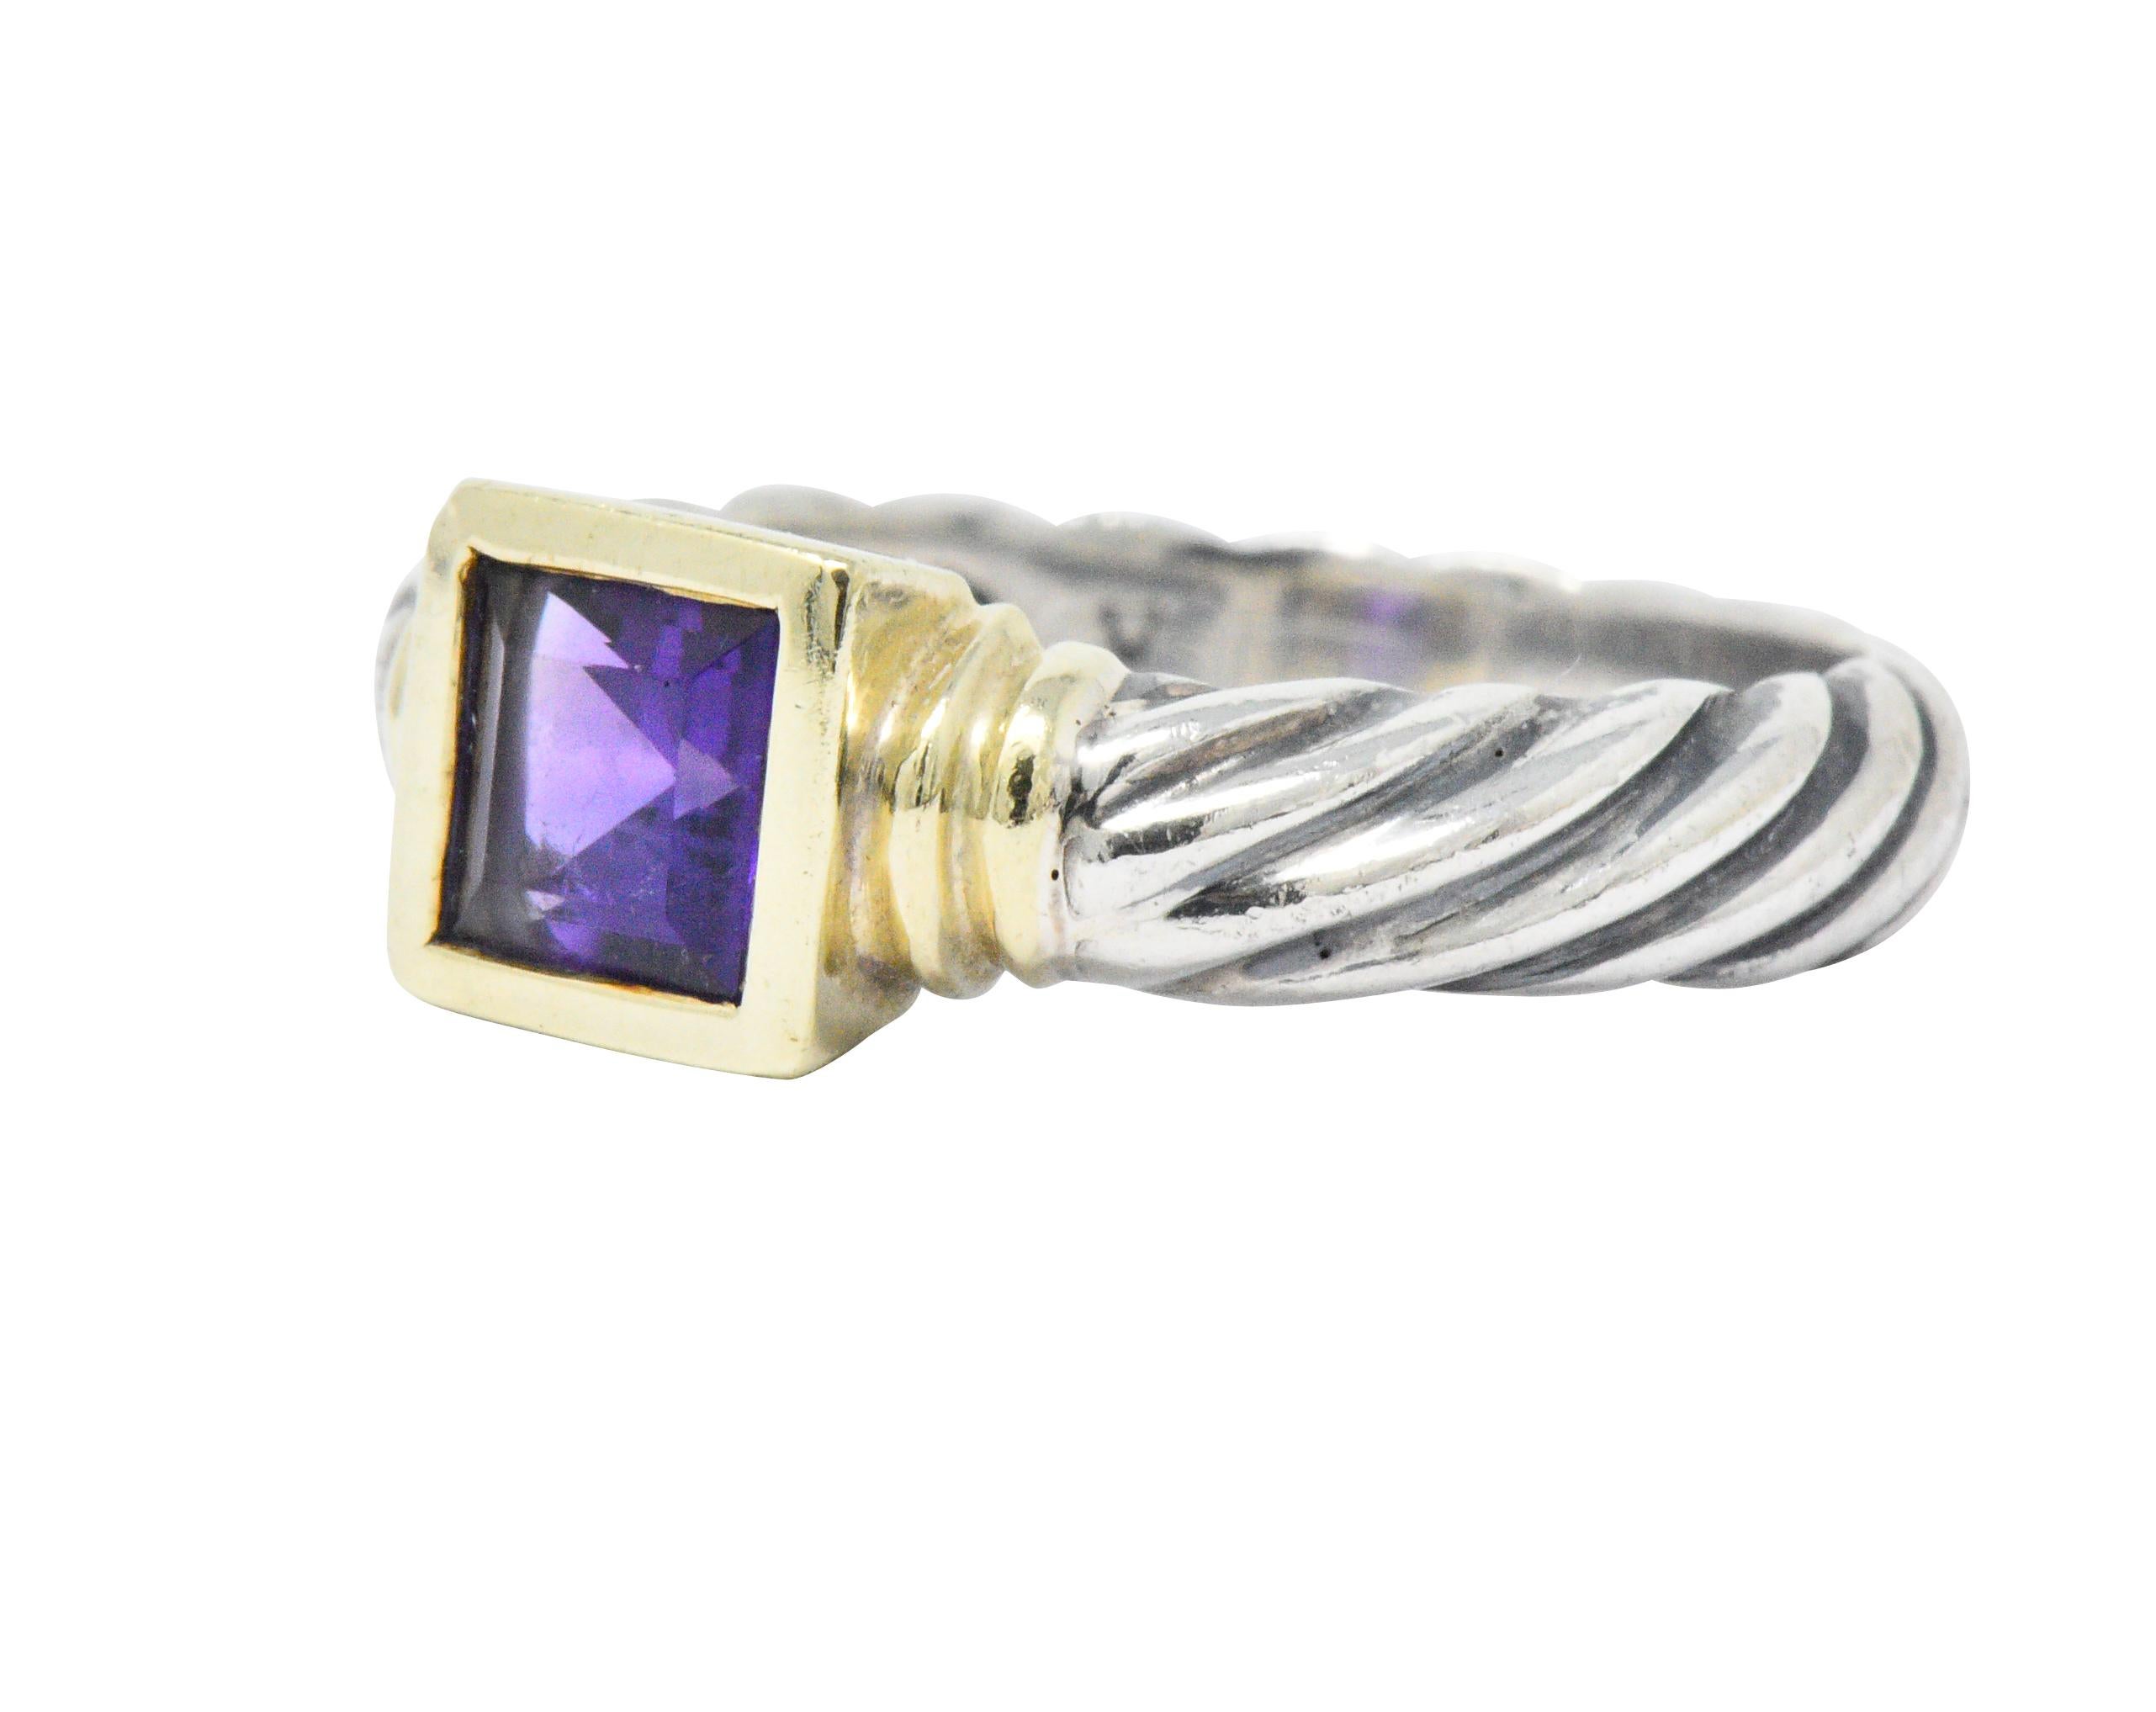 Centering a princess cut amethyst (rich, deep purple) bezel set in 14k gold

Ribbed 14k gold accents flank amethyst and embellish setting

David Yurman classic sterling silver cable twist band

Signed D. Yurman Sterling 14k

Top measures 6.5 mm wide